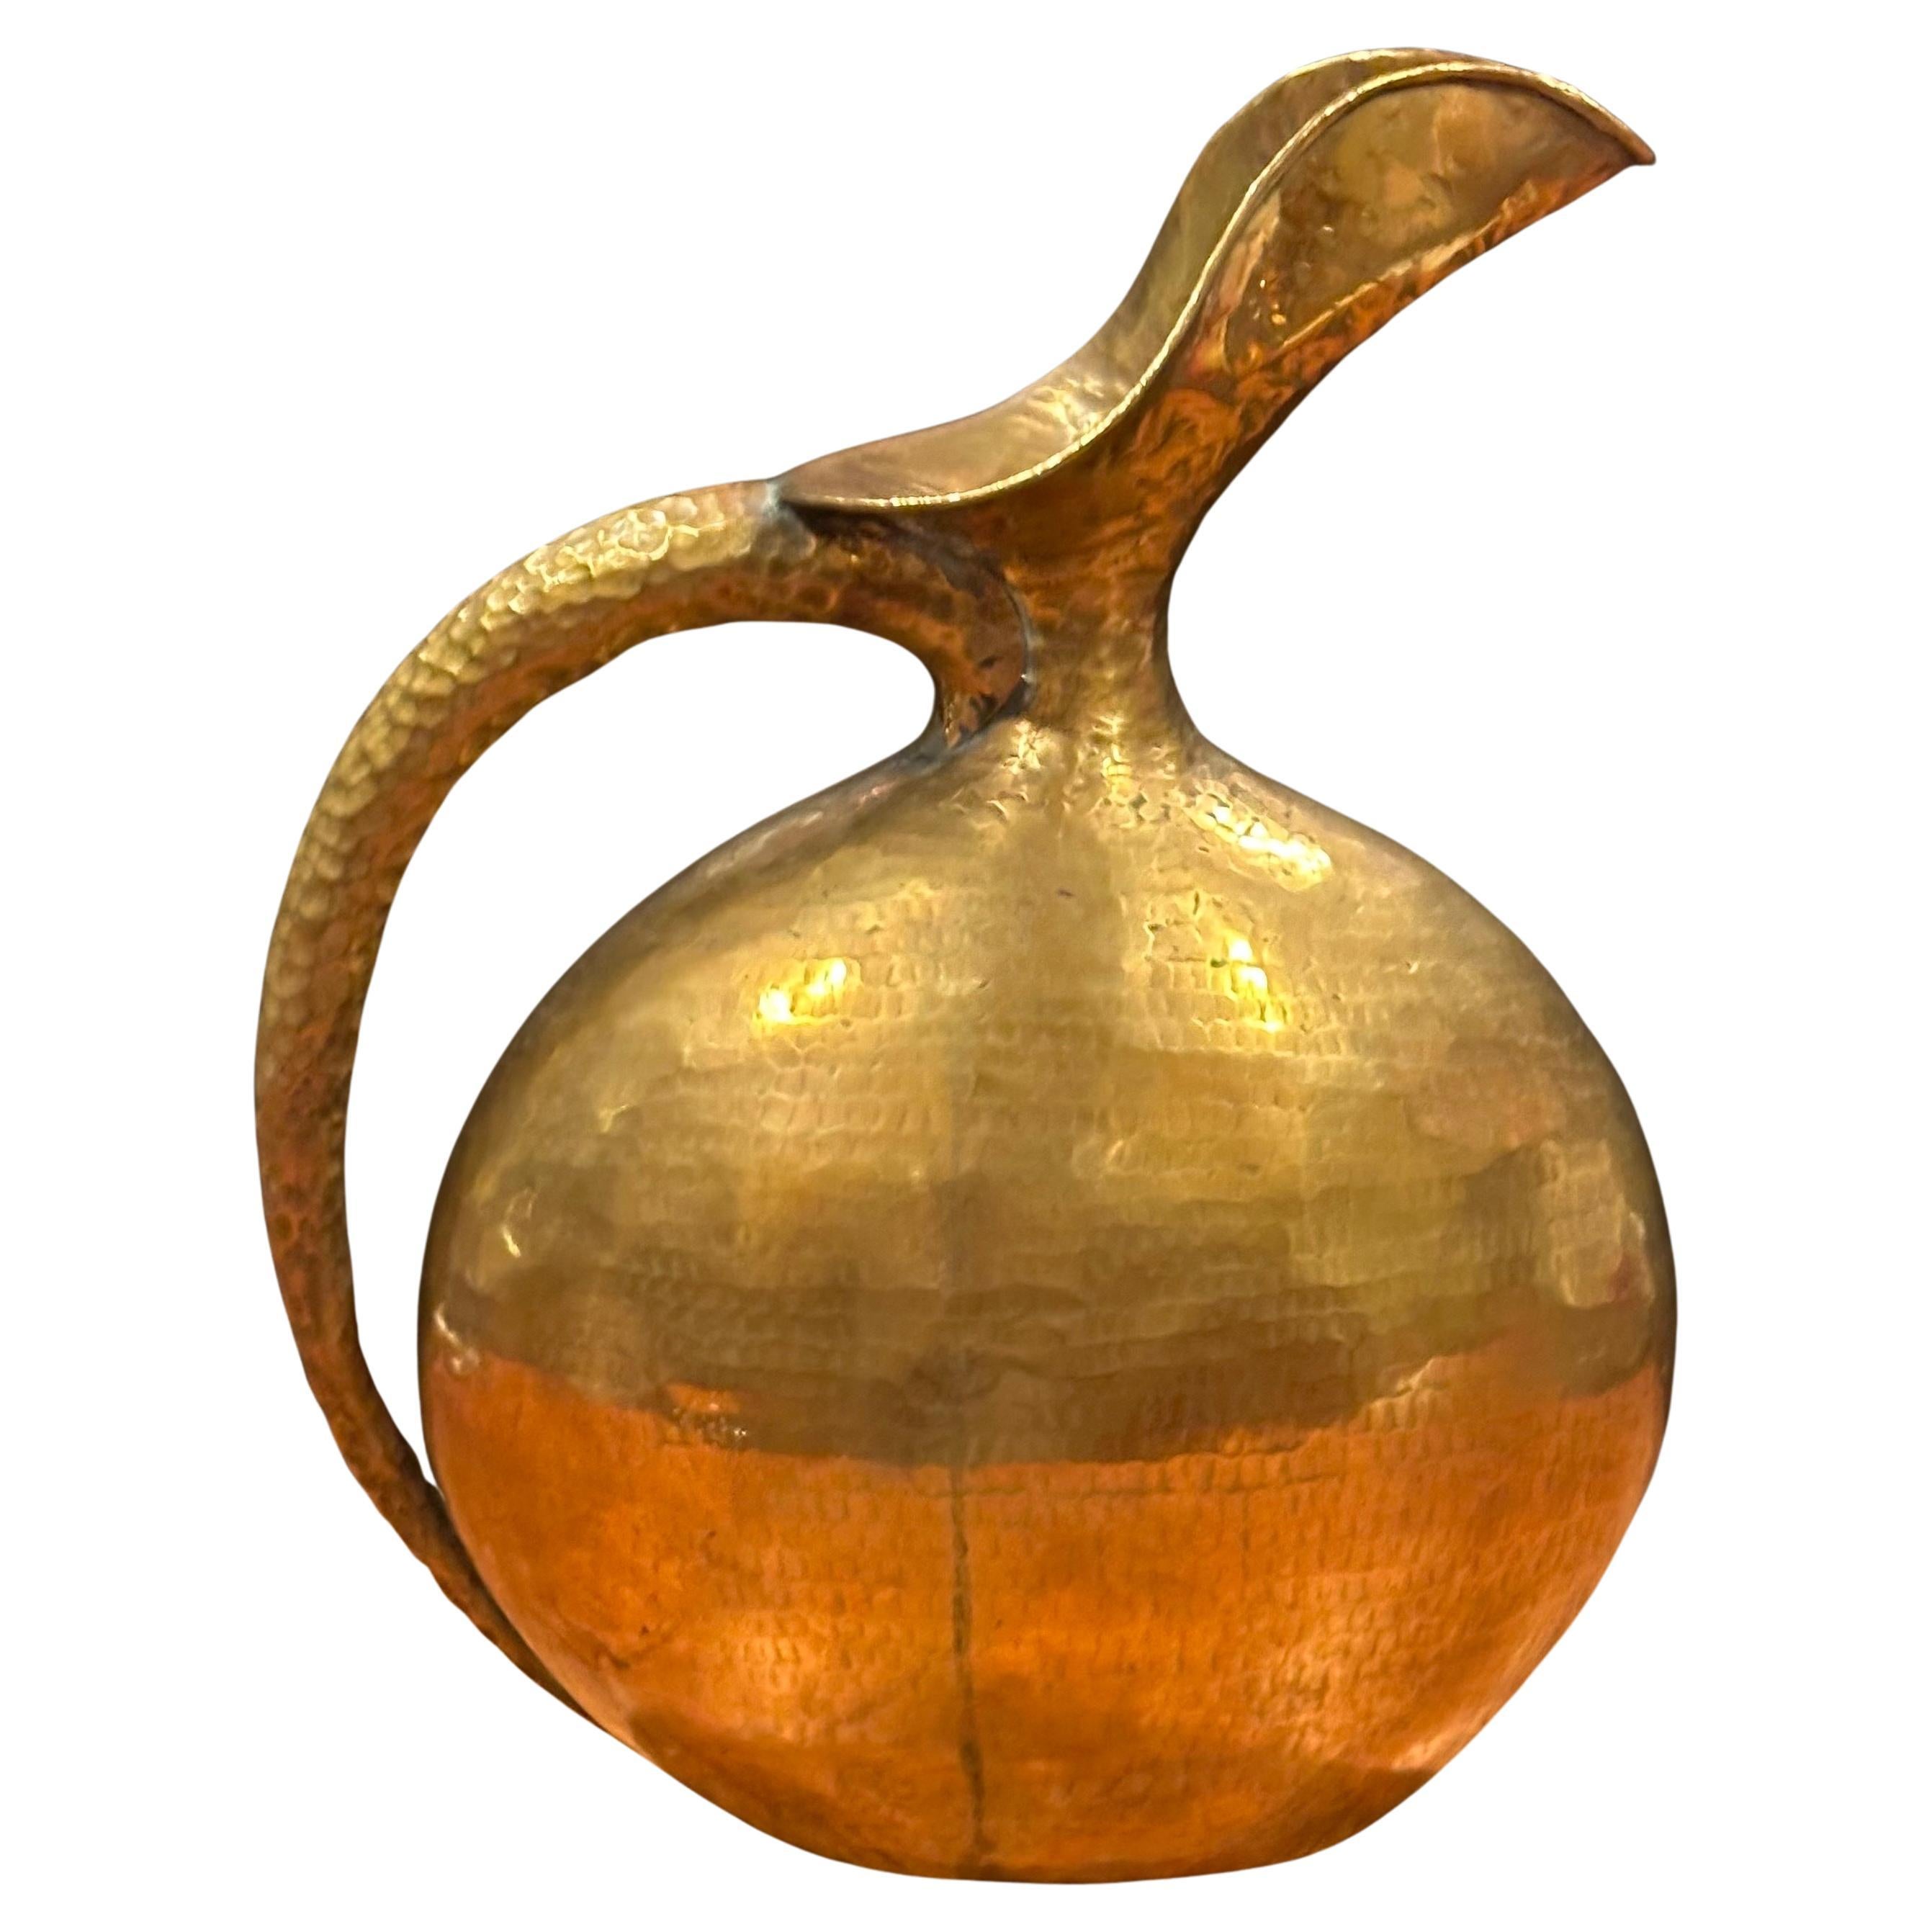 A very nice Italian modernist hammered brass pitcher / ewer by Egidio Casagrande, circa 1940s. The piece is in very good condition and measures 10